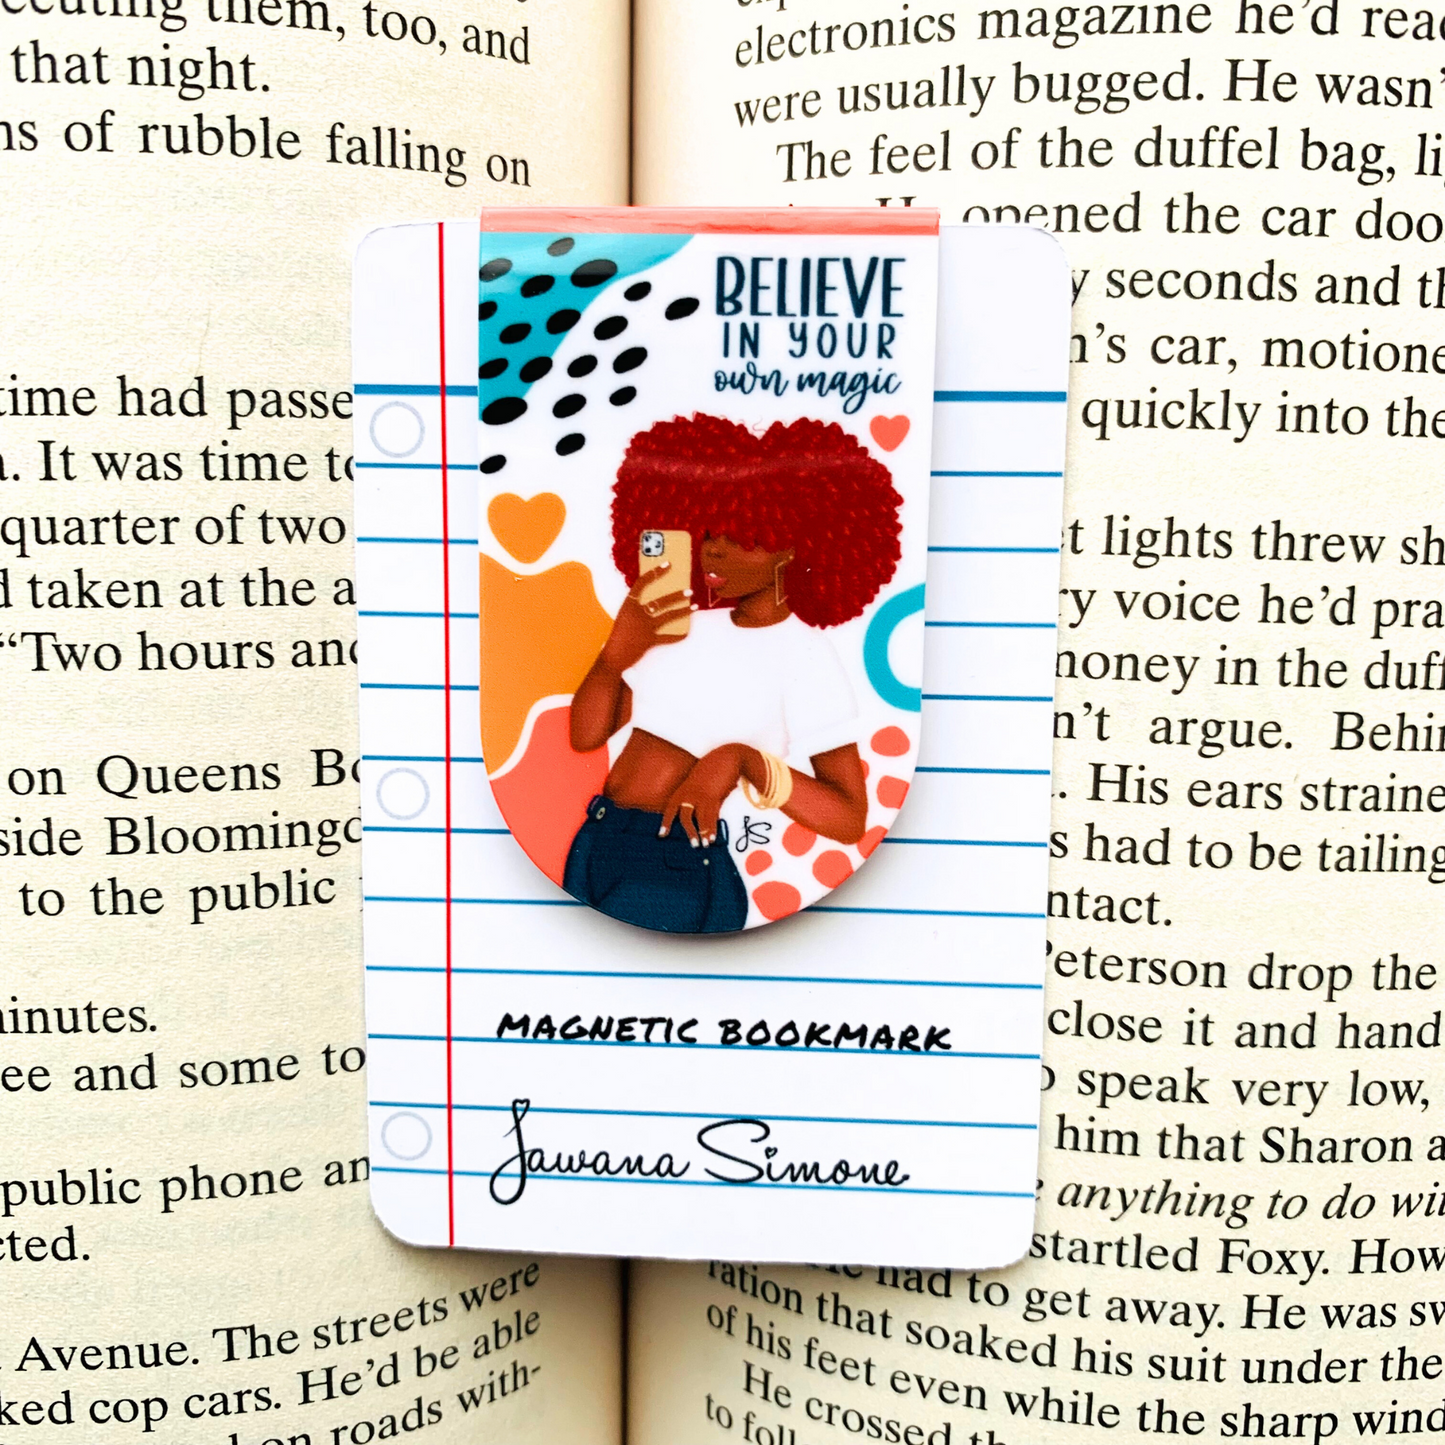 Believe in Your Own Magic Magnetic Bookmark